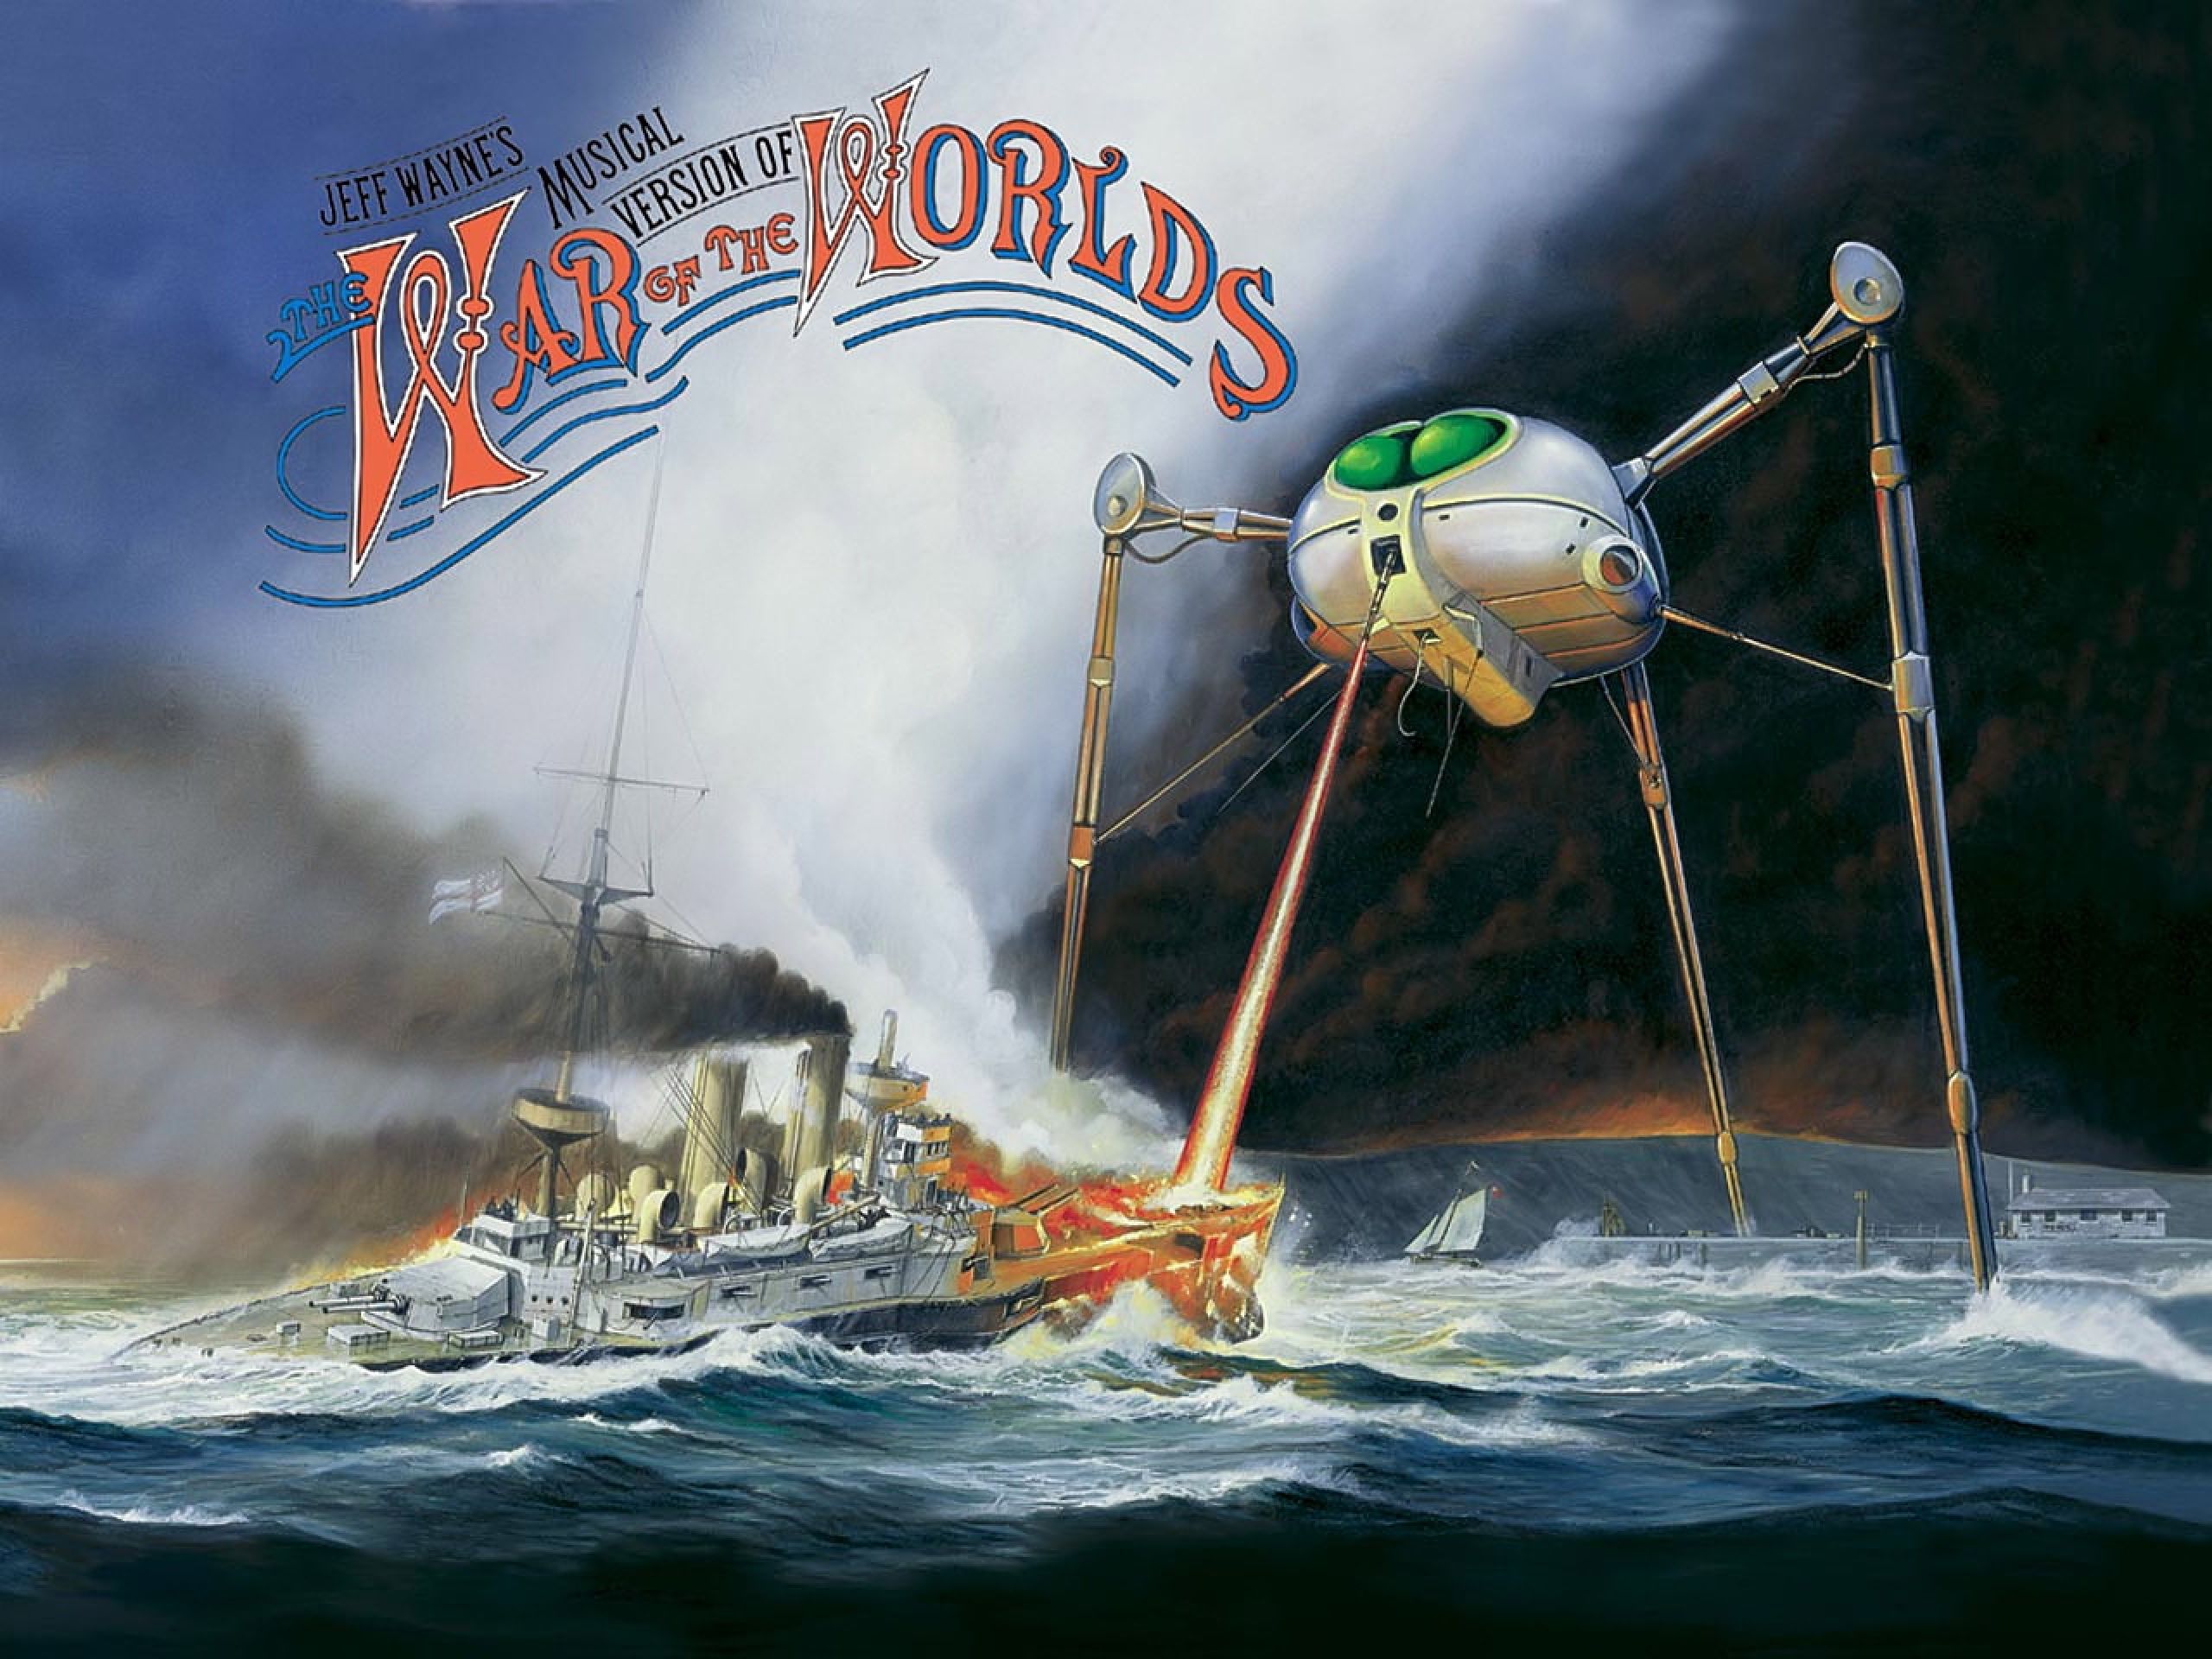 war of the worlds wallpaper,vehicle,watercraft,ship,boat,naval architecture